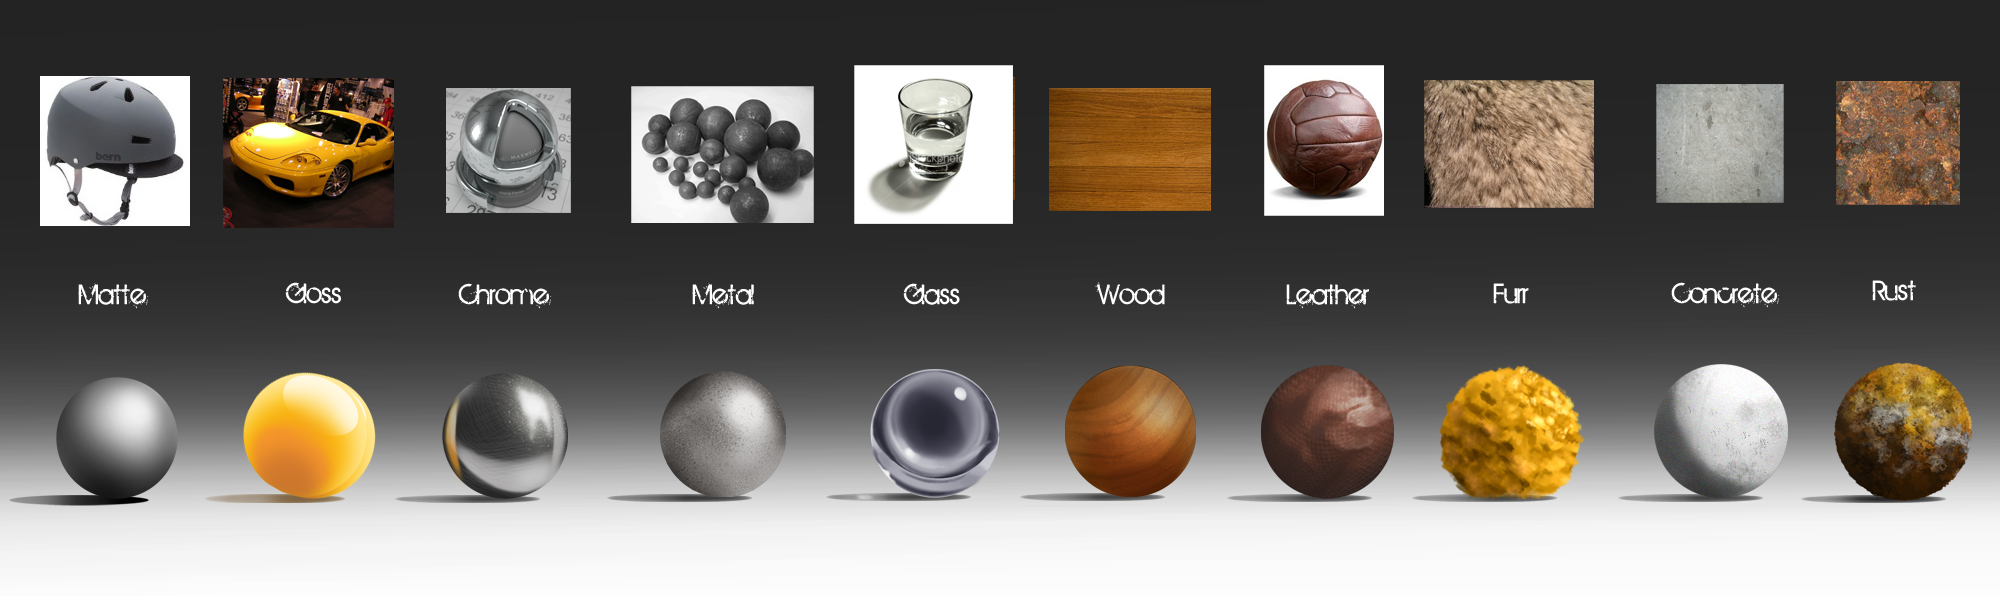 Material Rendering Assignment